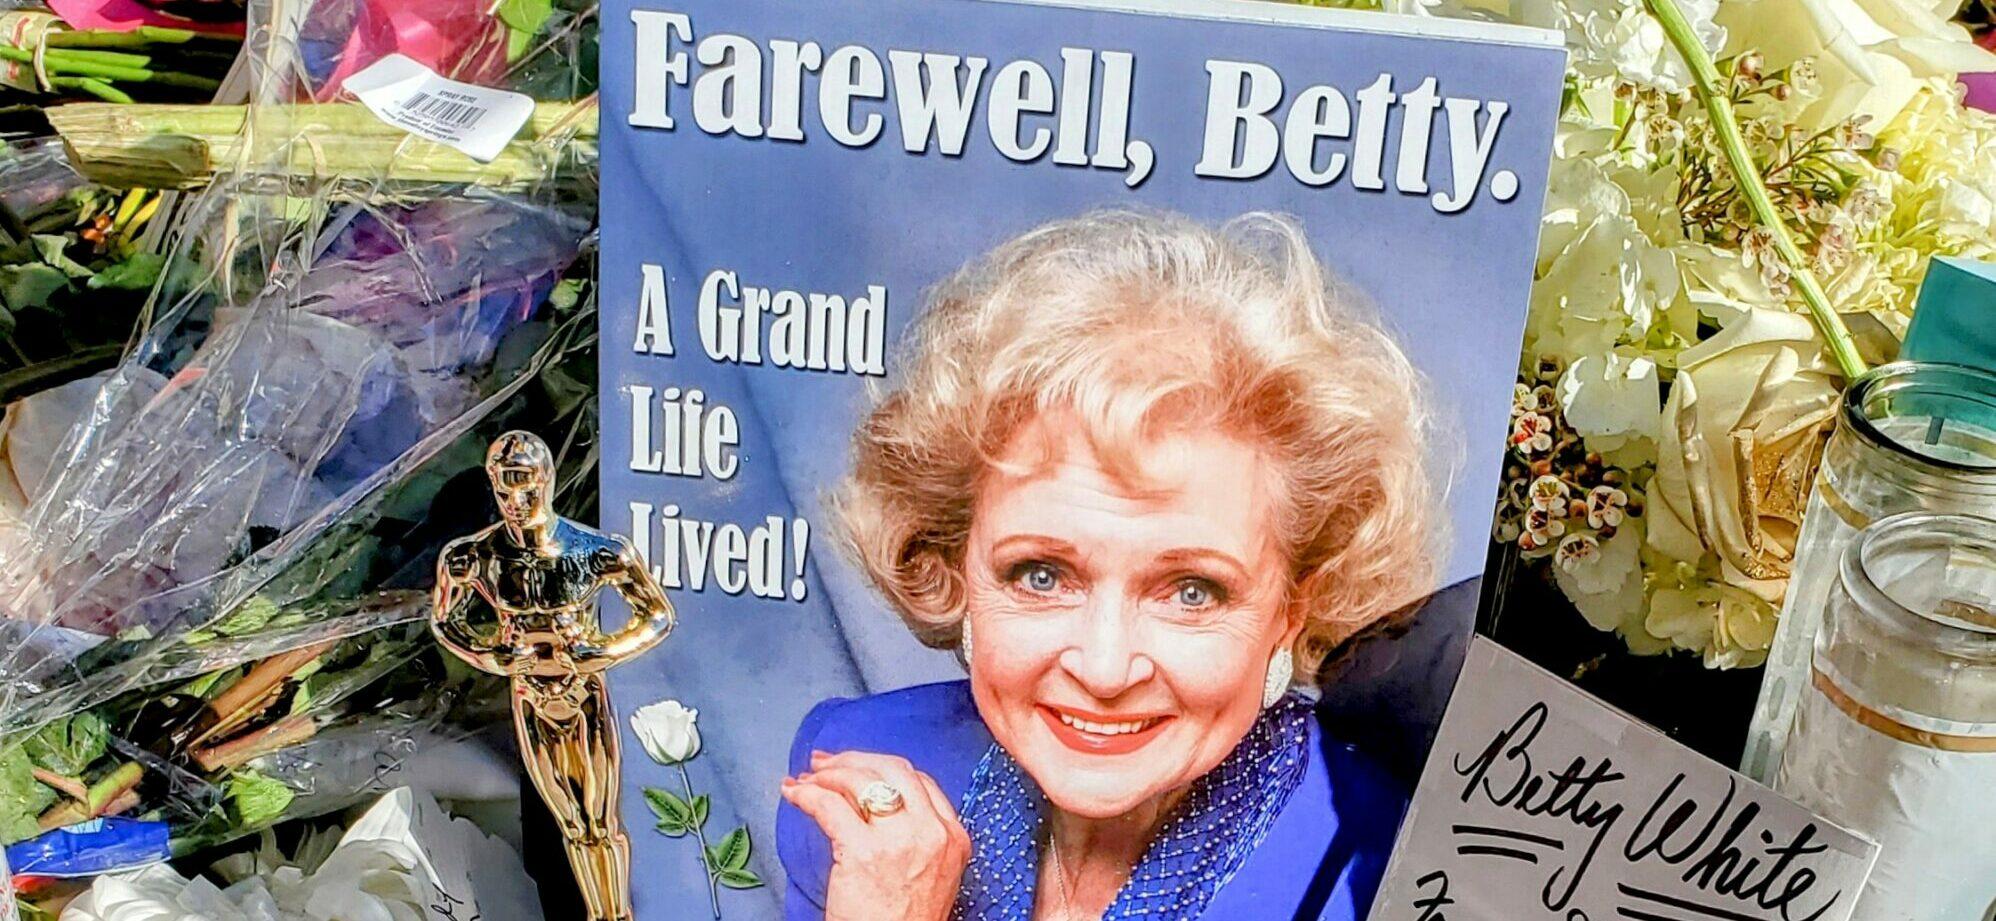 Betty White apos s Hollywood Star gets tons of fan love mourning the loss of her